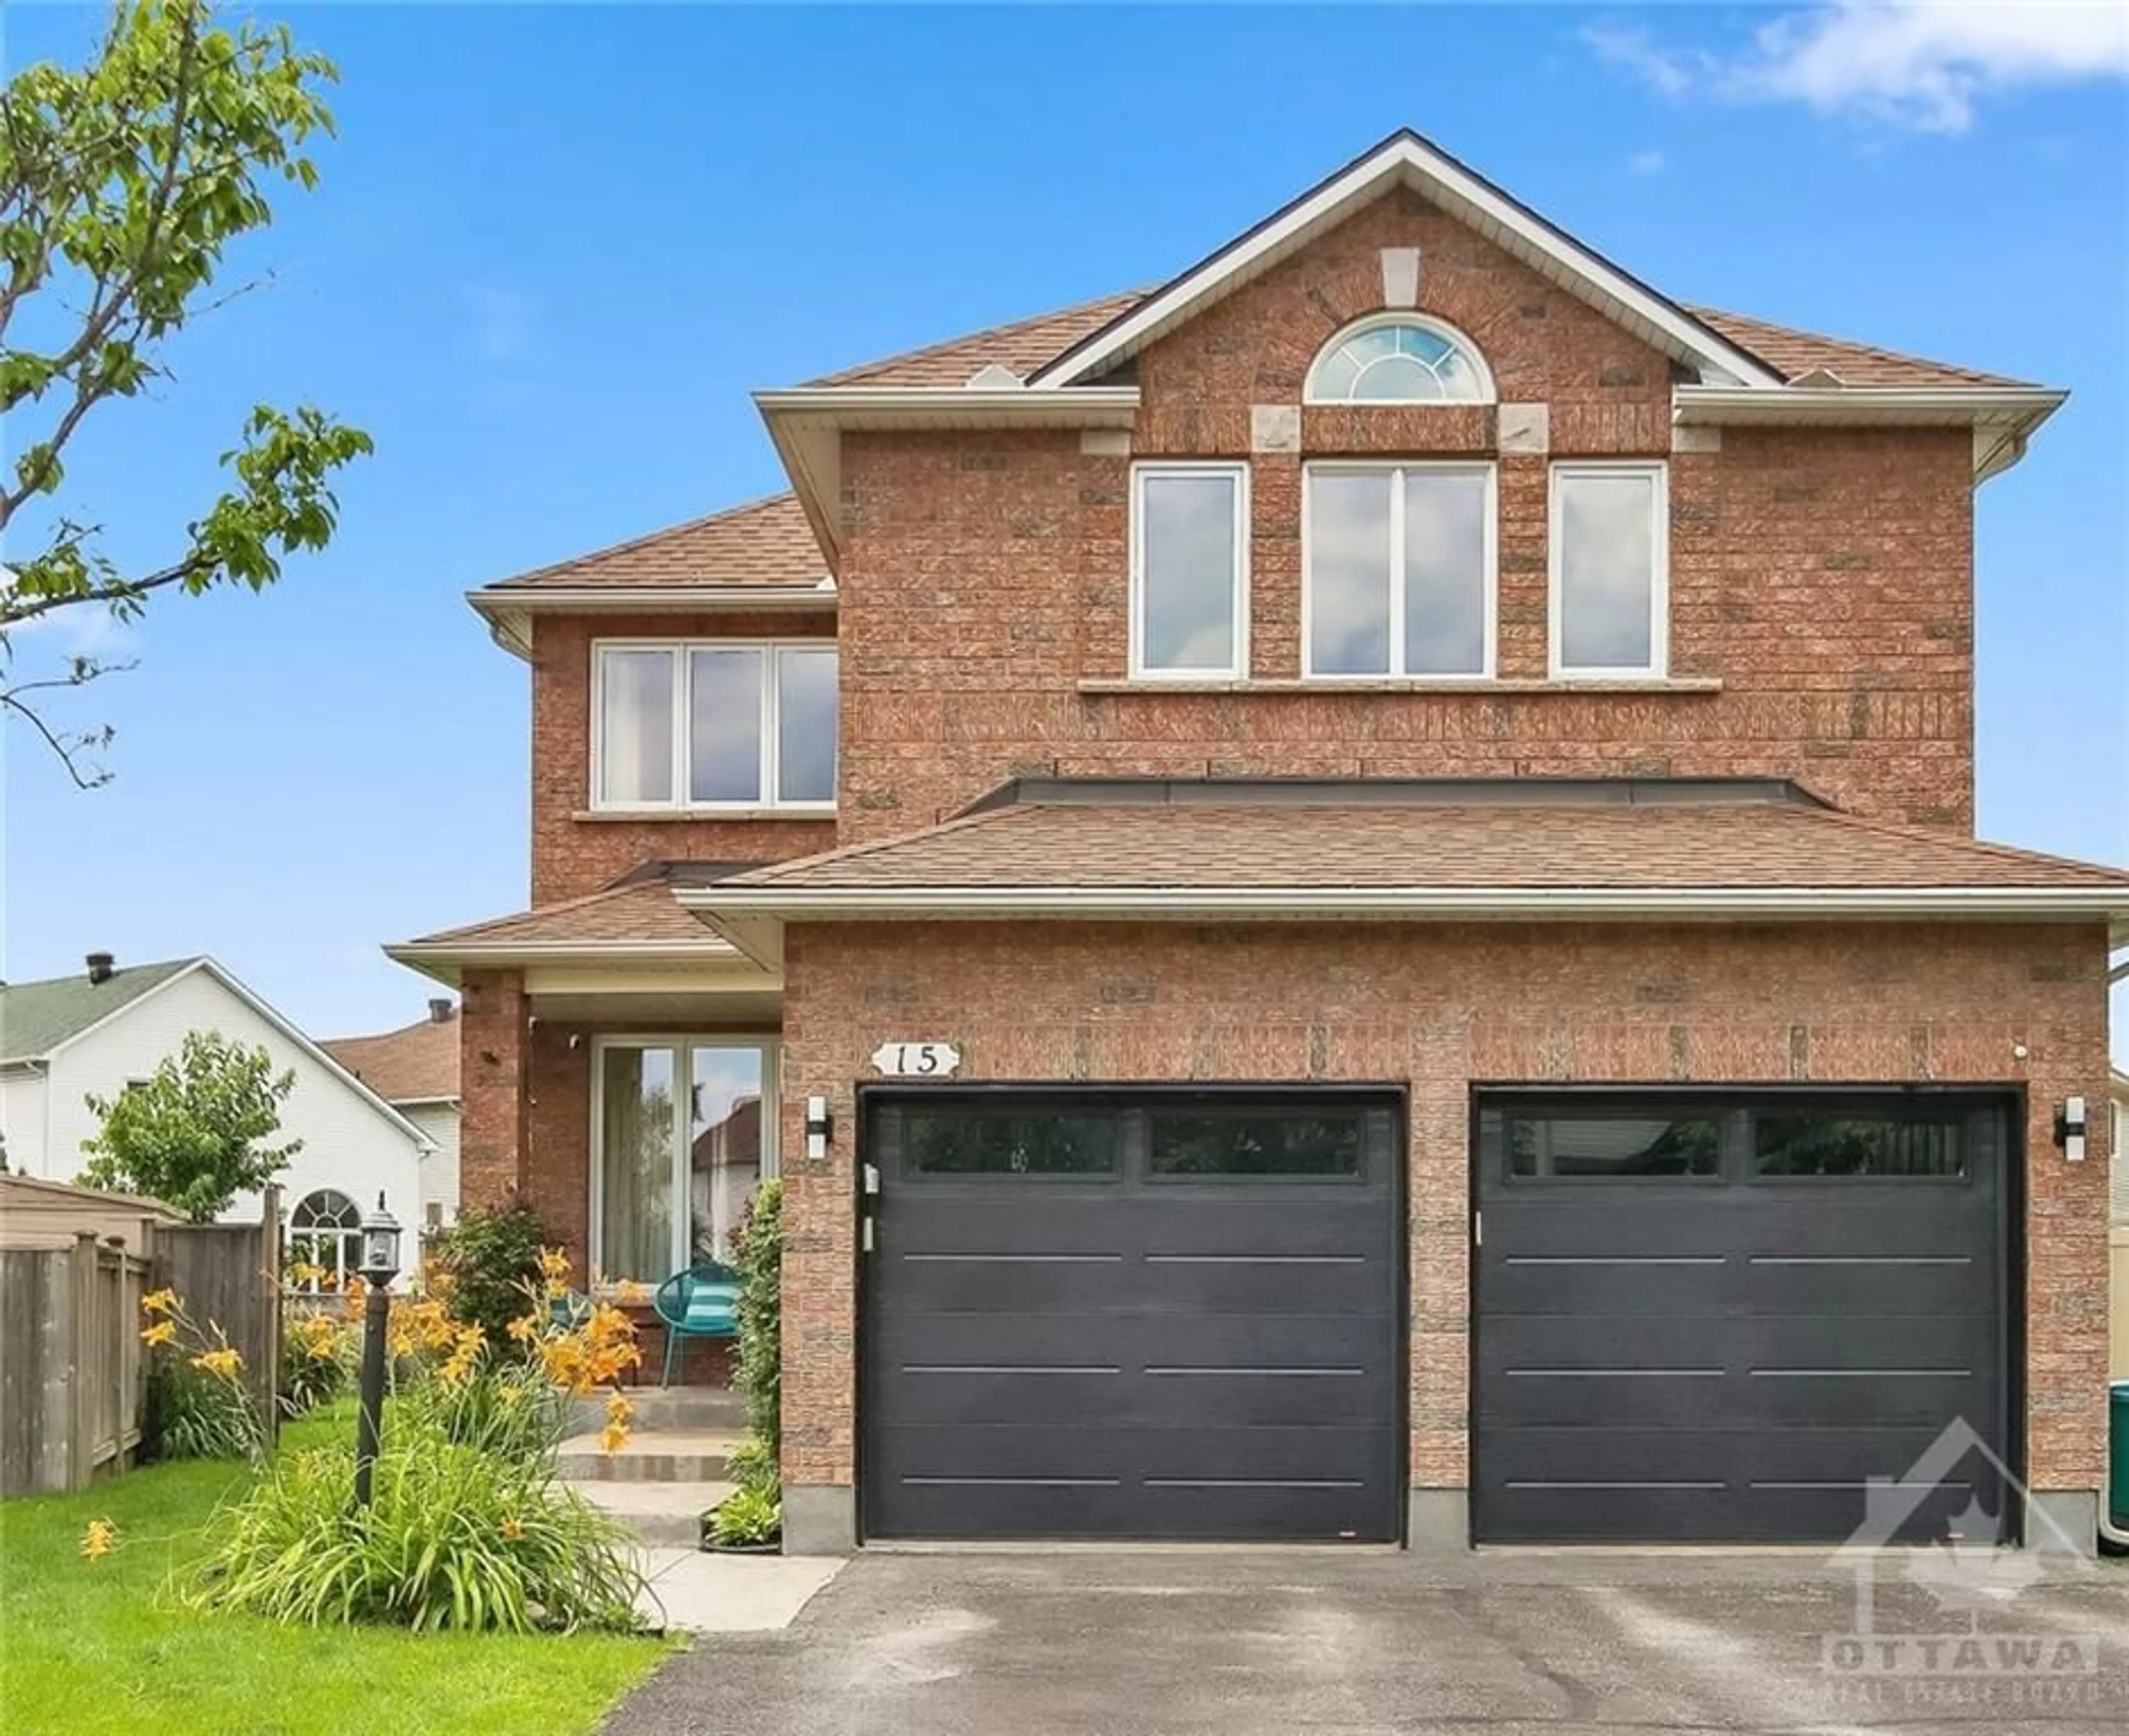 Home with brick exterior material for 15 KNOWLTON Dr, Ottawa Ontario K2G 6P1